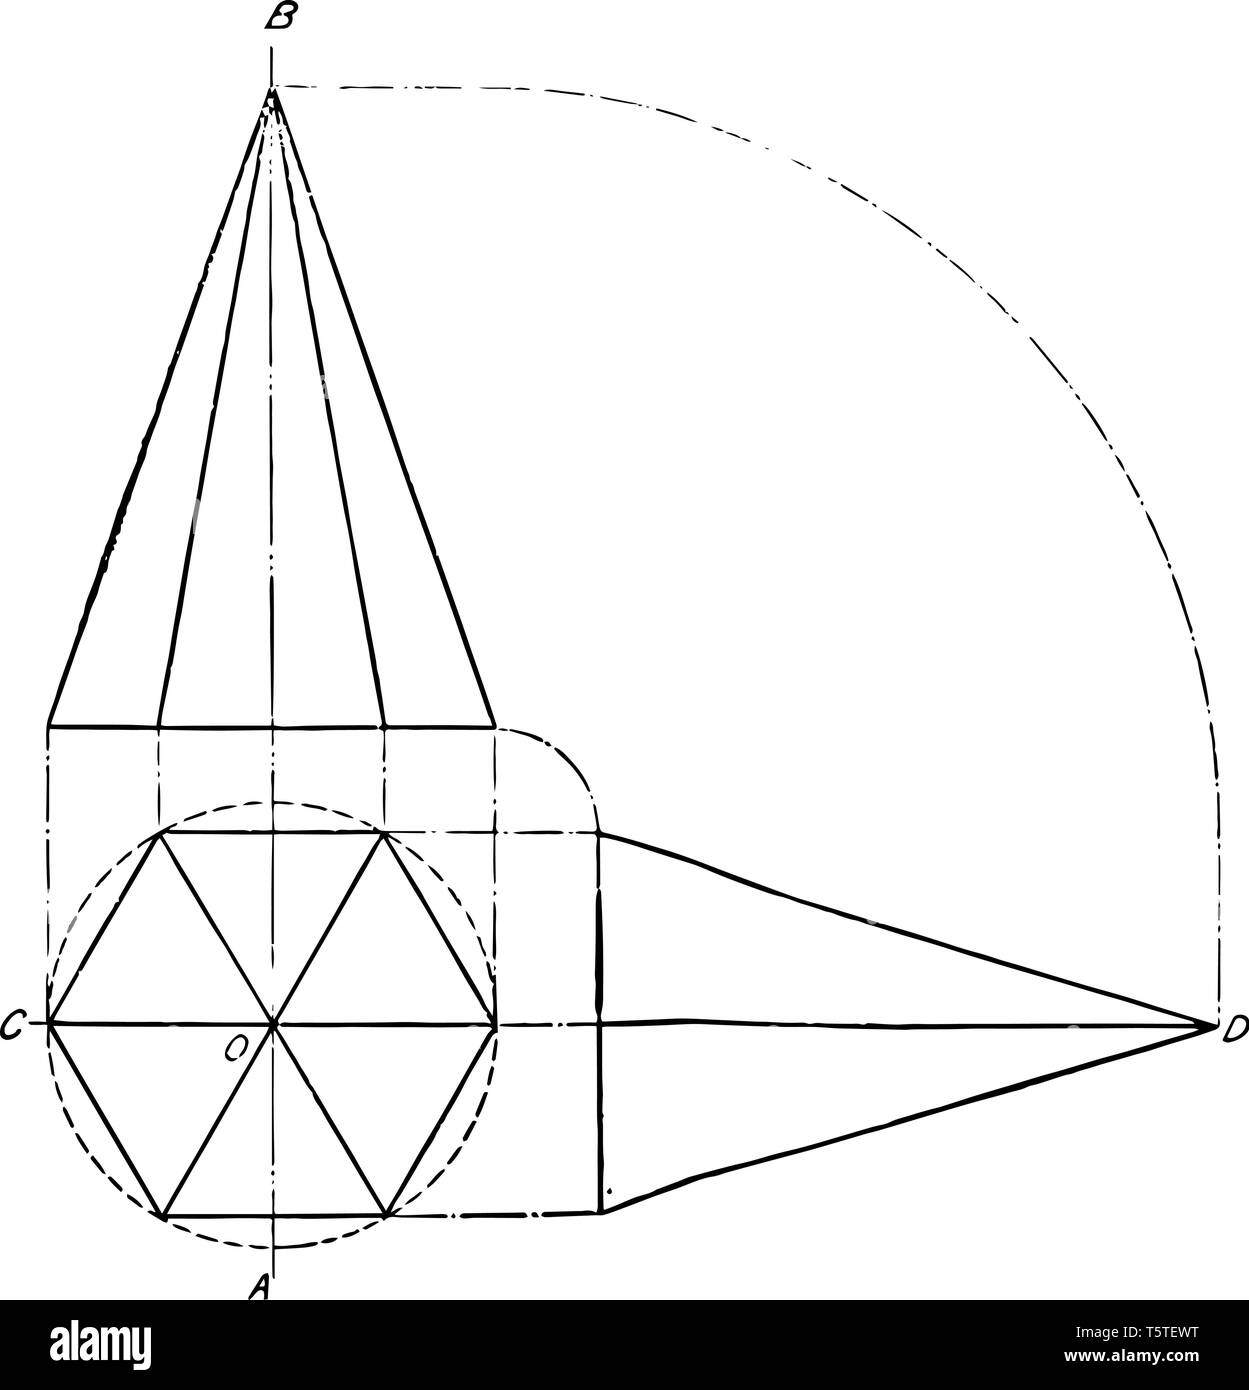 The image shows the projection of a hexagonal pyramid that is in a correct position, vintage line drawing or engraving illustration. Stock Vector